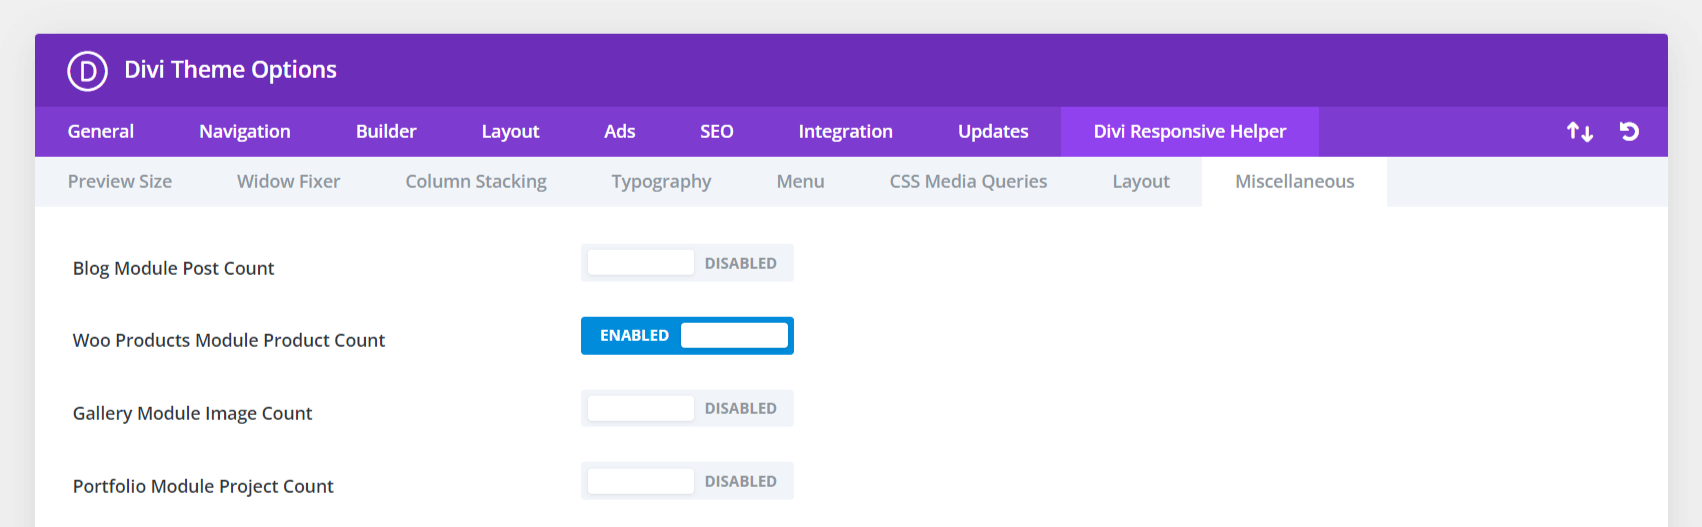 Divi Theme Options Woo Products Module Product Count setting